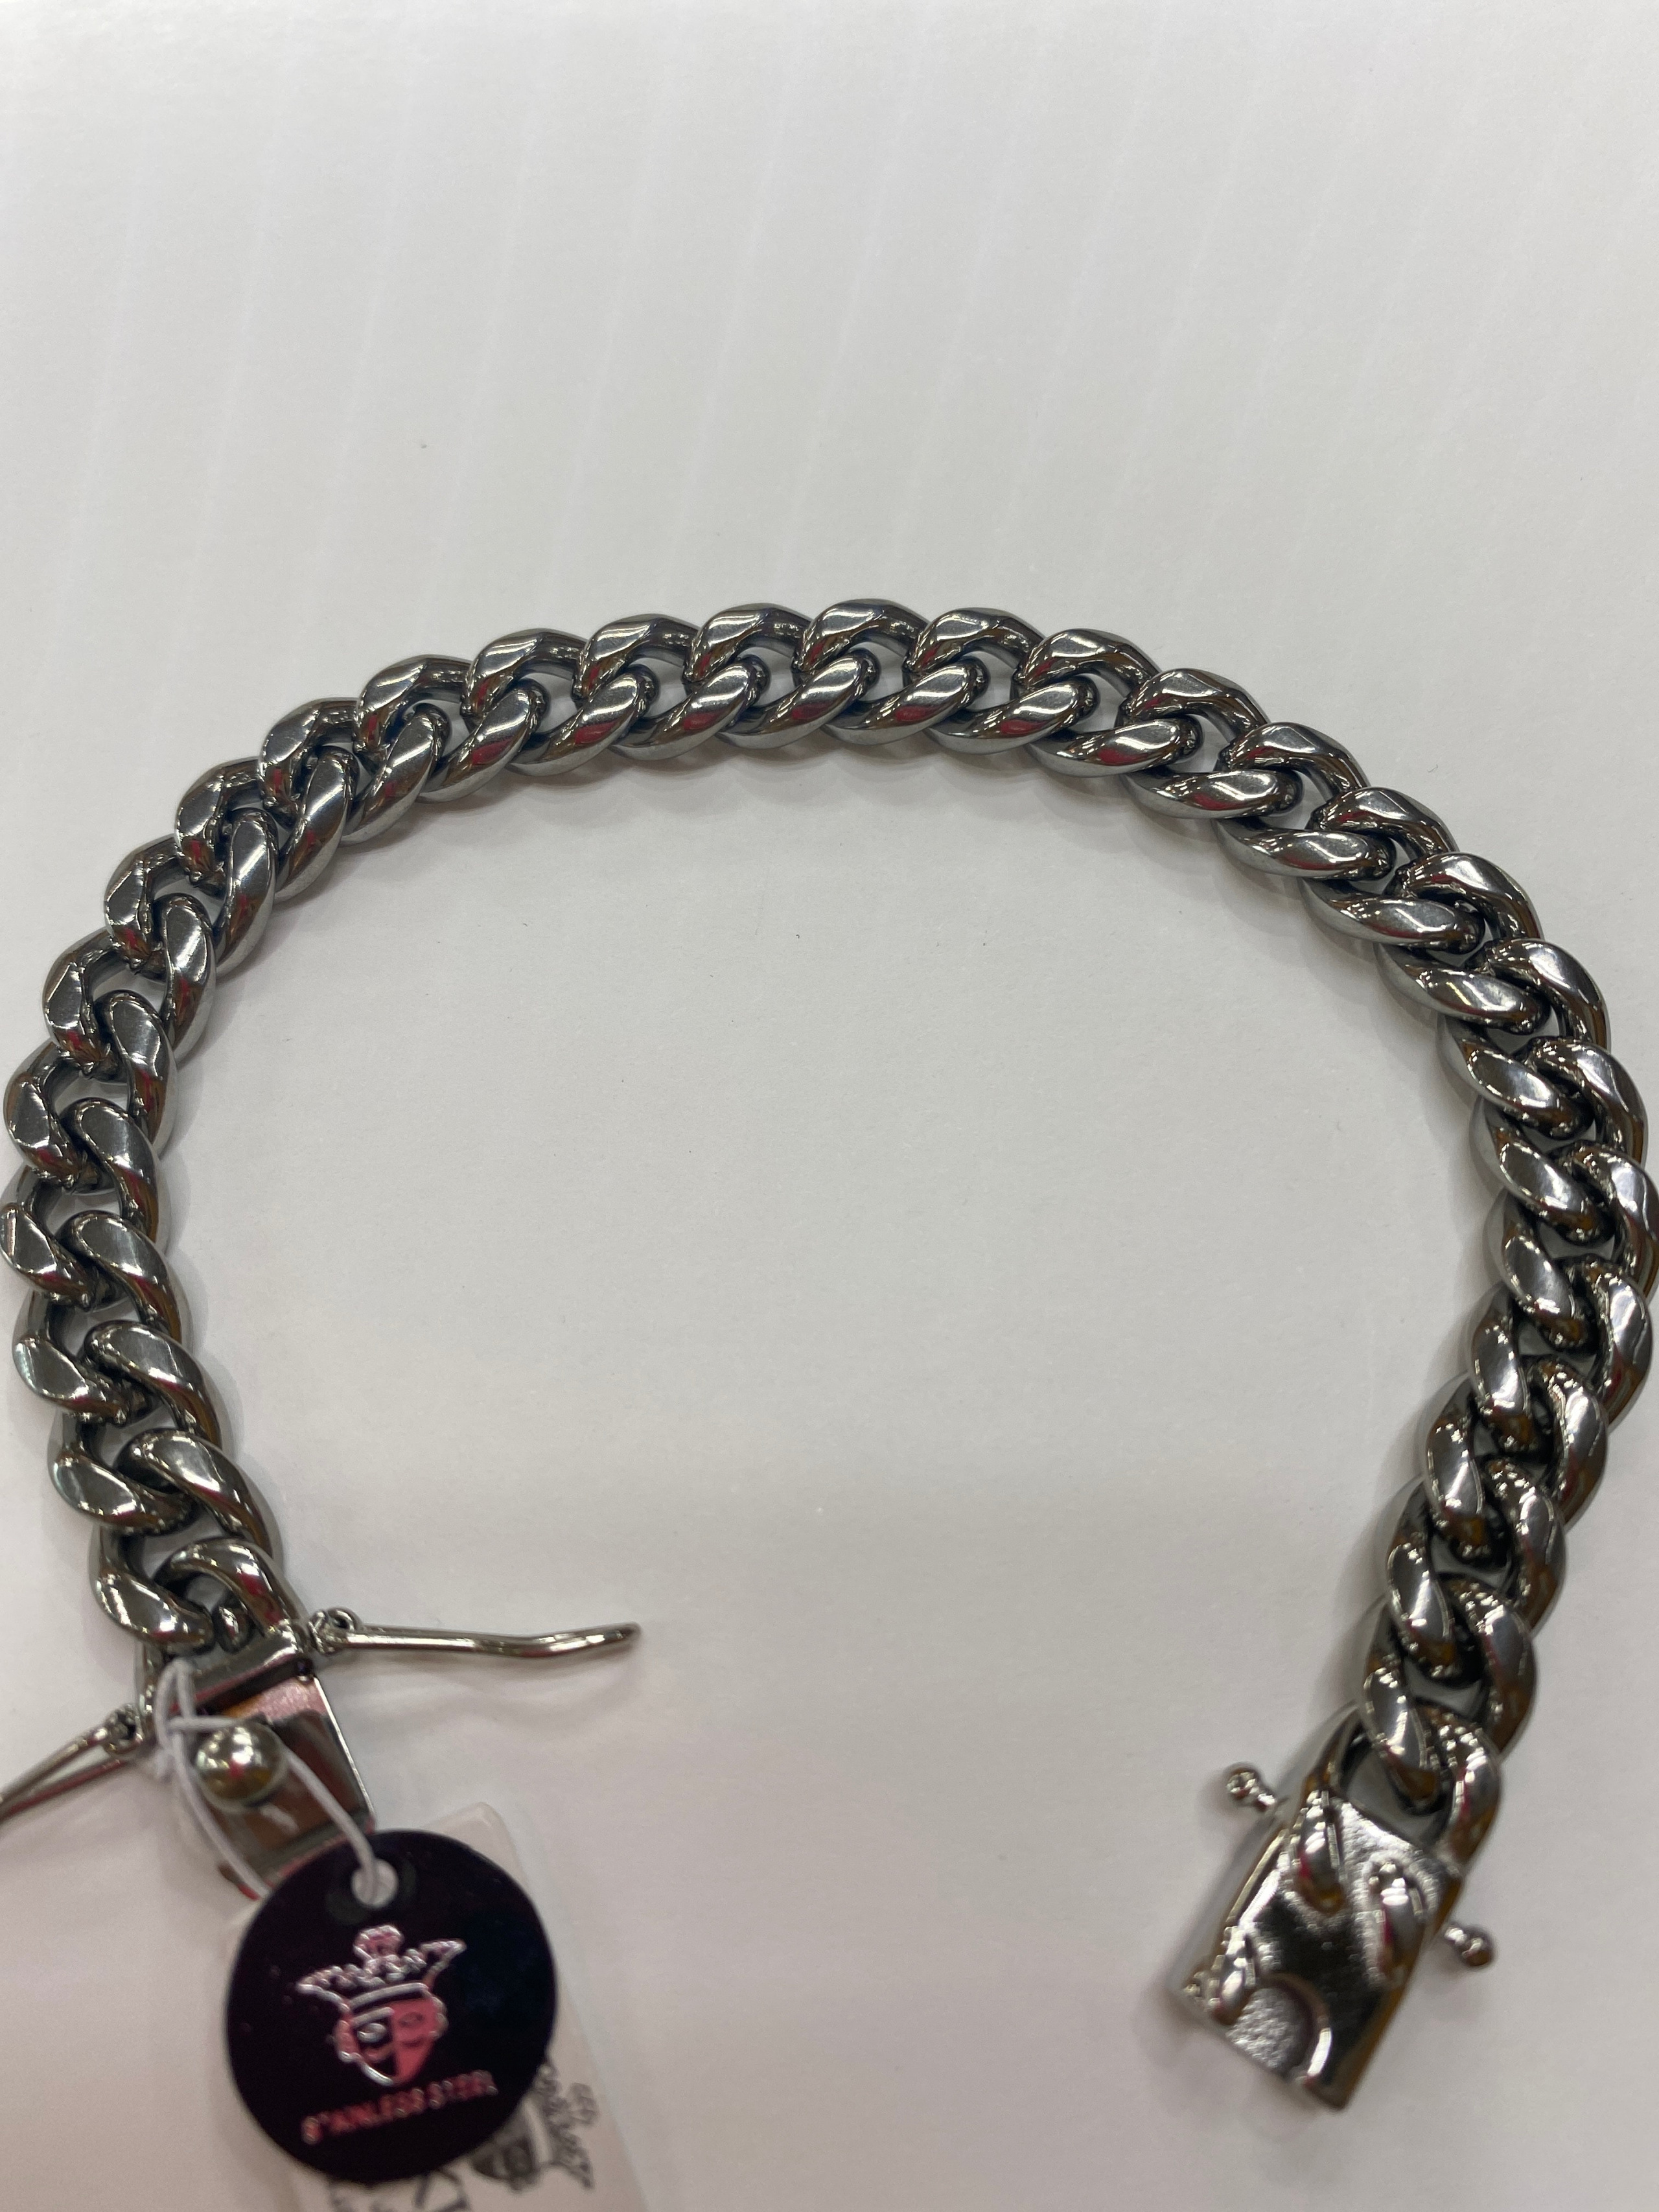 9 INCH STAINLESS STEEL BRACELET WITH SAFETY CLASP